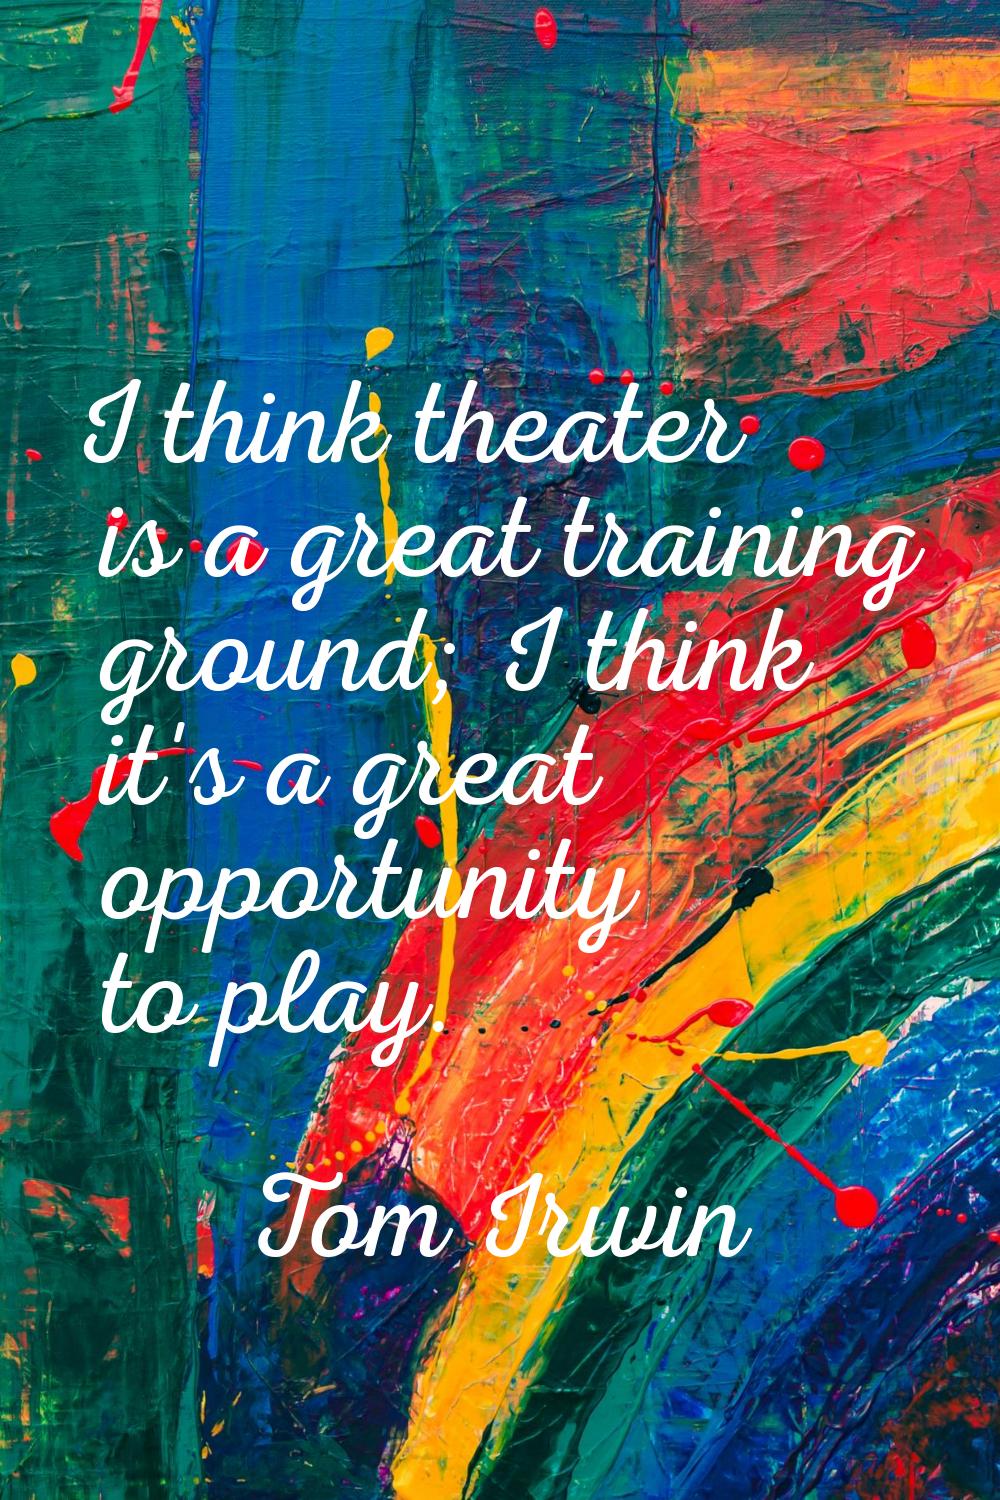 I think theater is a great training ground; I think it's a great opportunity to play.